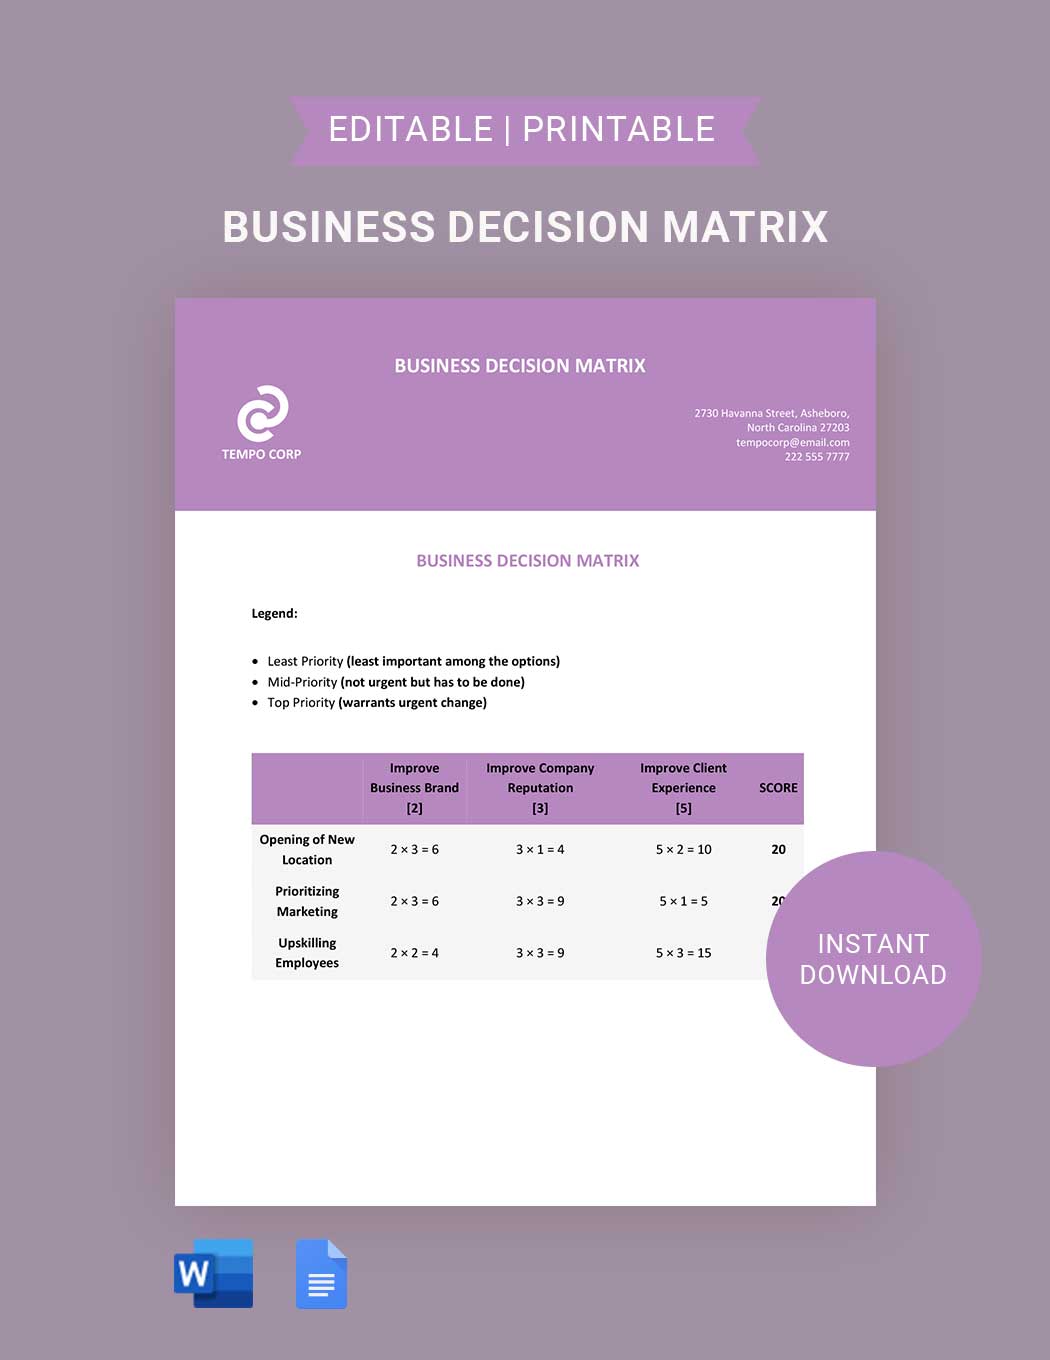 Business Decision Matrix Template in Word, Google Docs